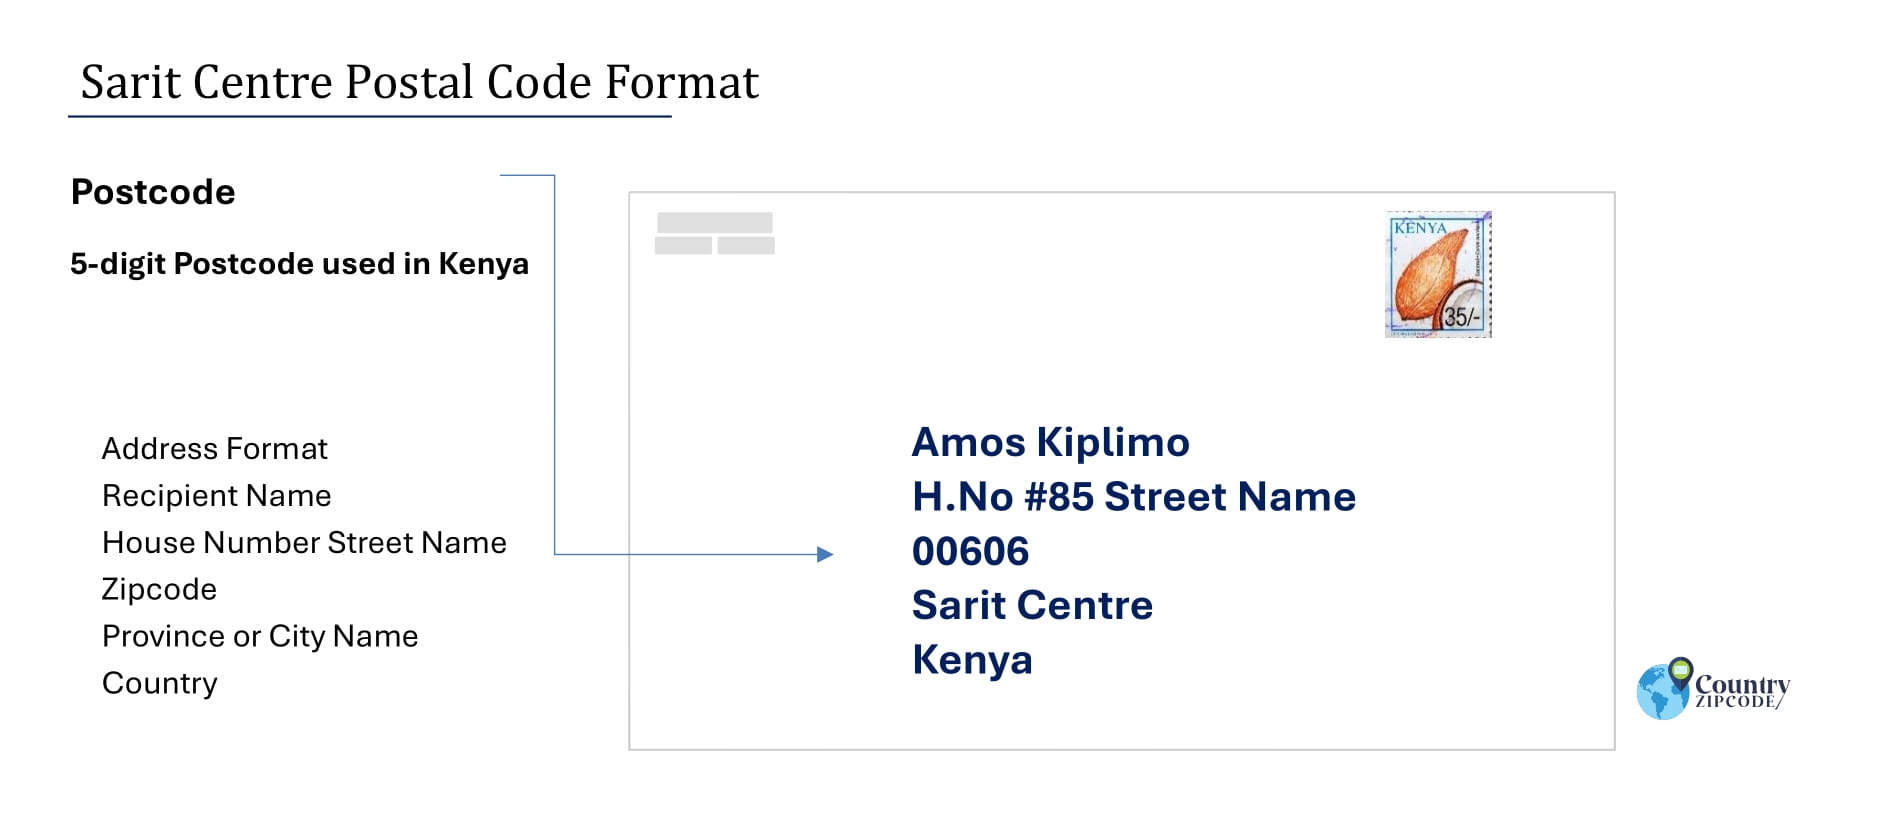 Example of Sarit Centre Address and postal code format